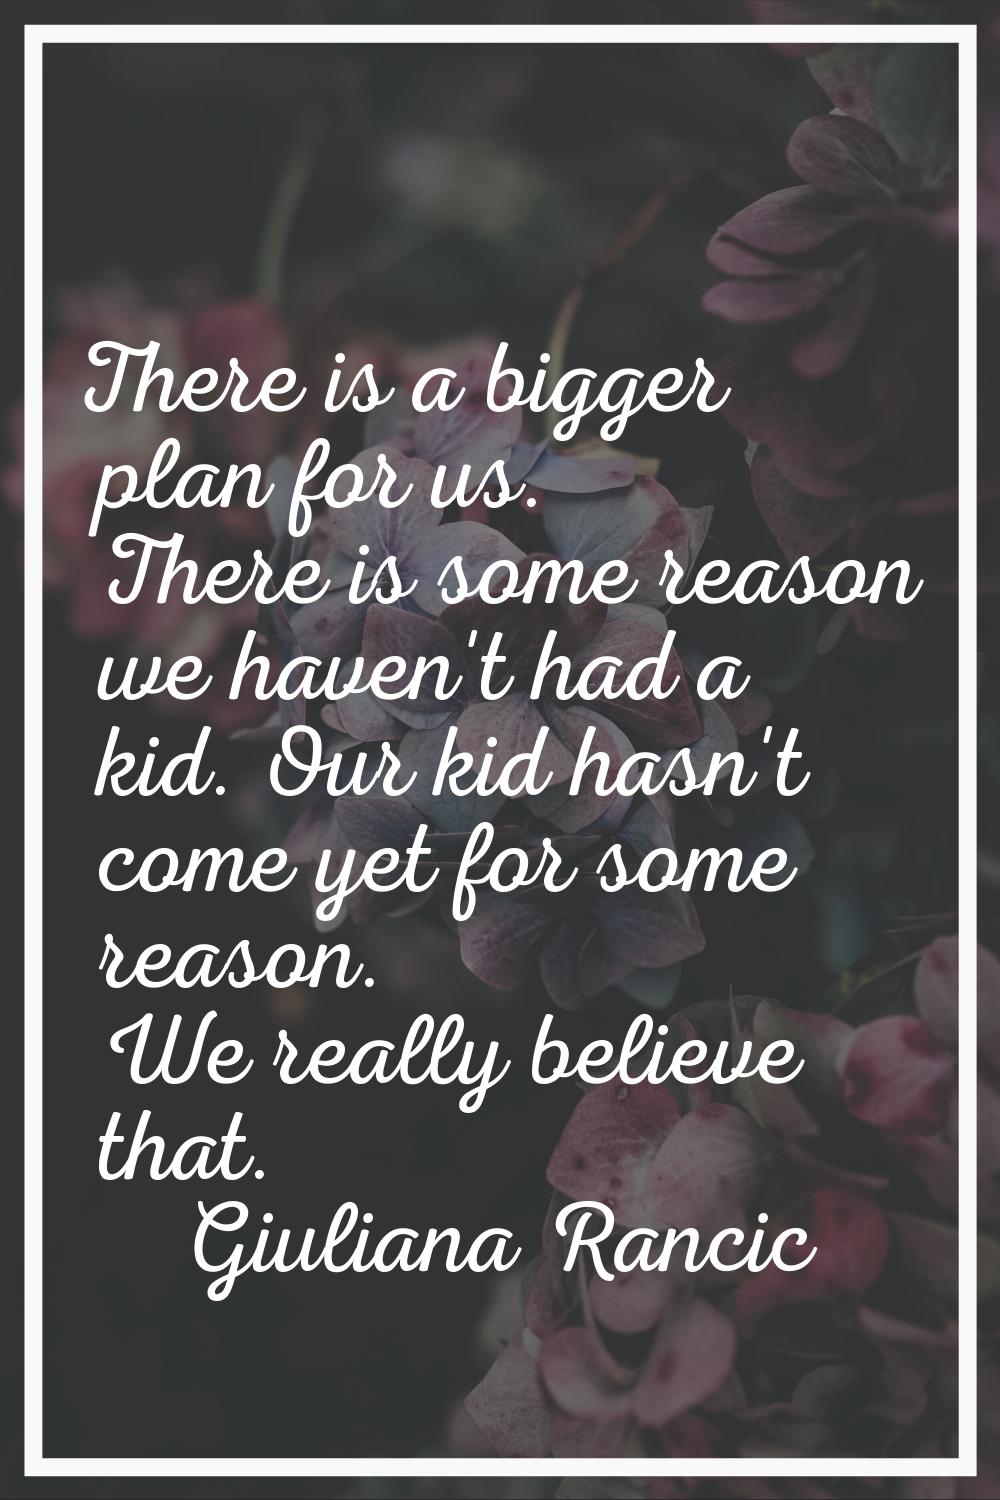 There is a bigger plan for us. There is some reason we haven't had a kid. Our kid hasn't come yet f